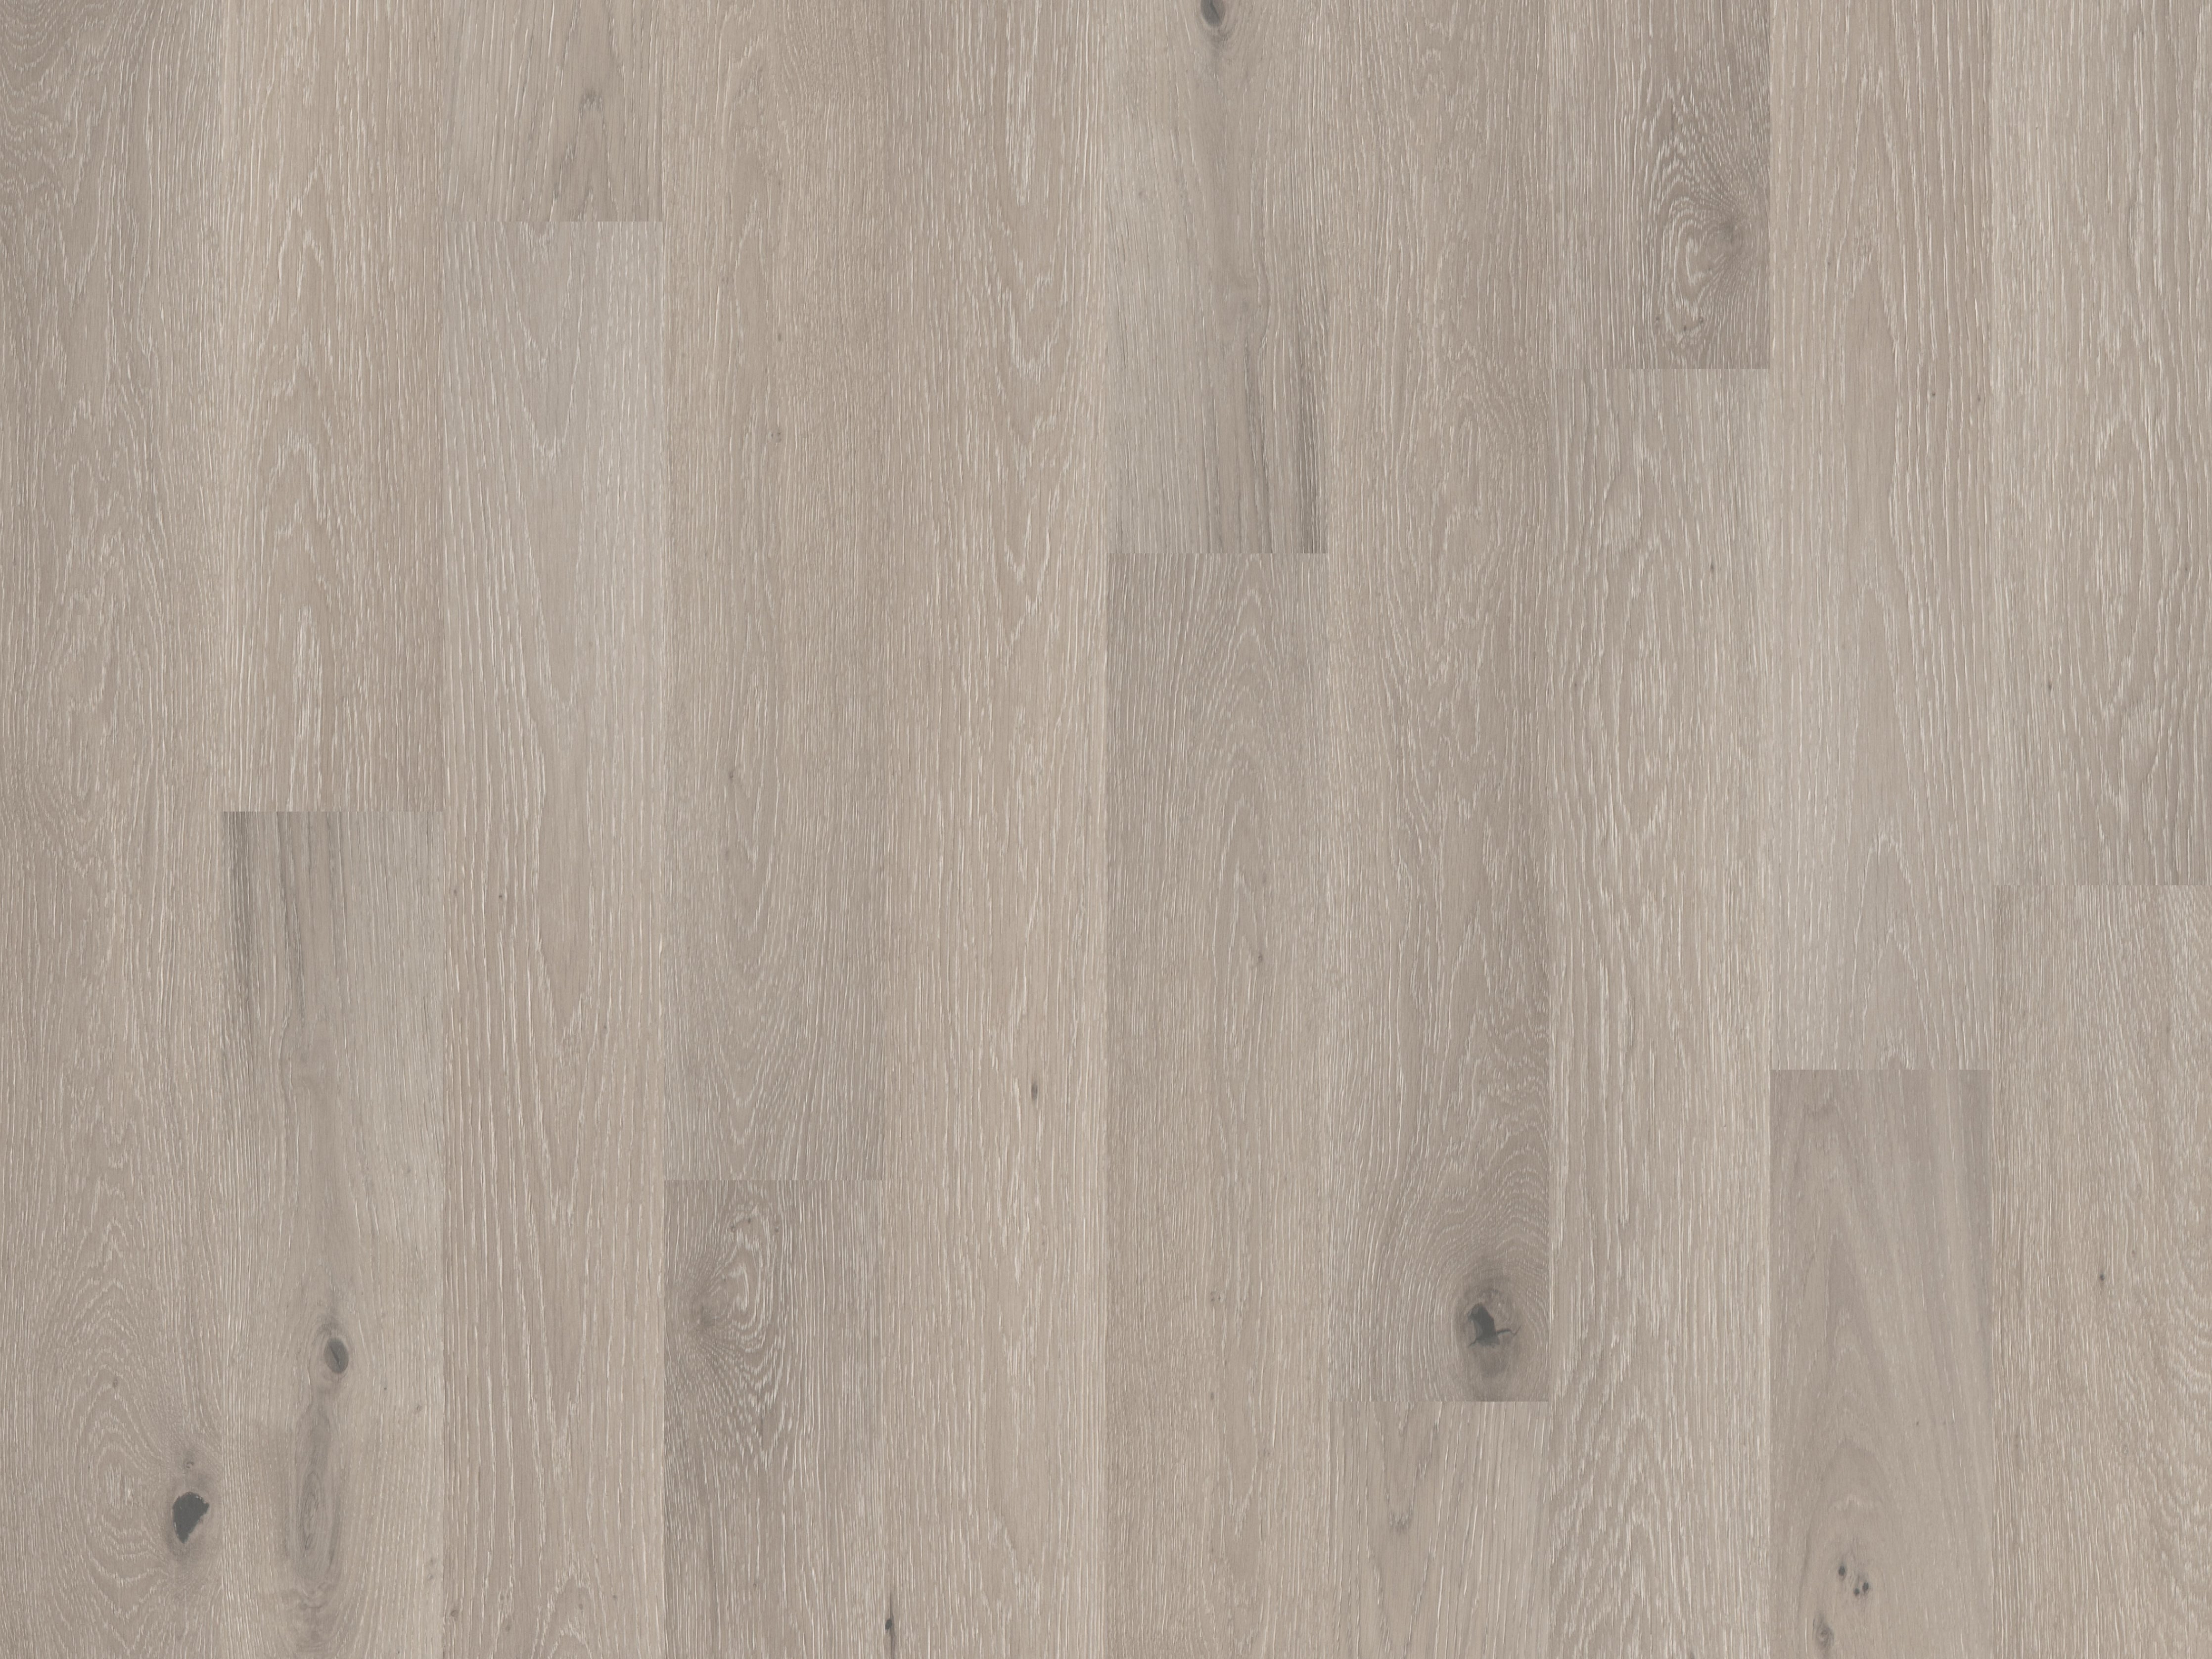 duchateau the guild lineage ava european oak engineered hardnatural wood floor uv lacquer finish for interior use distributed by surface group international